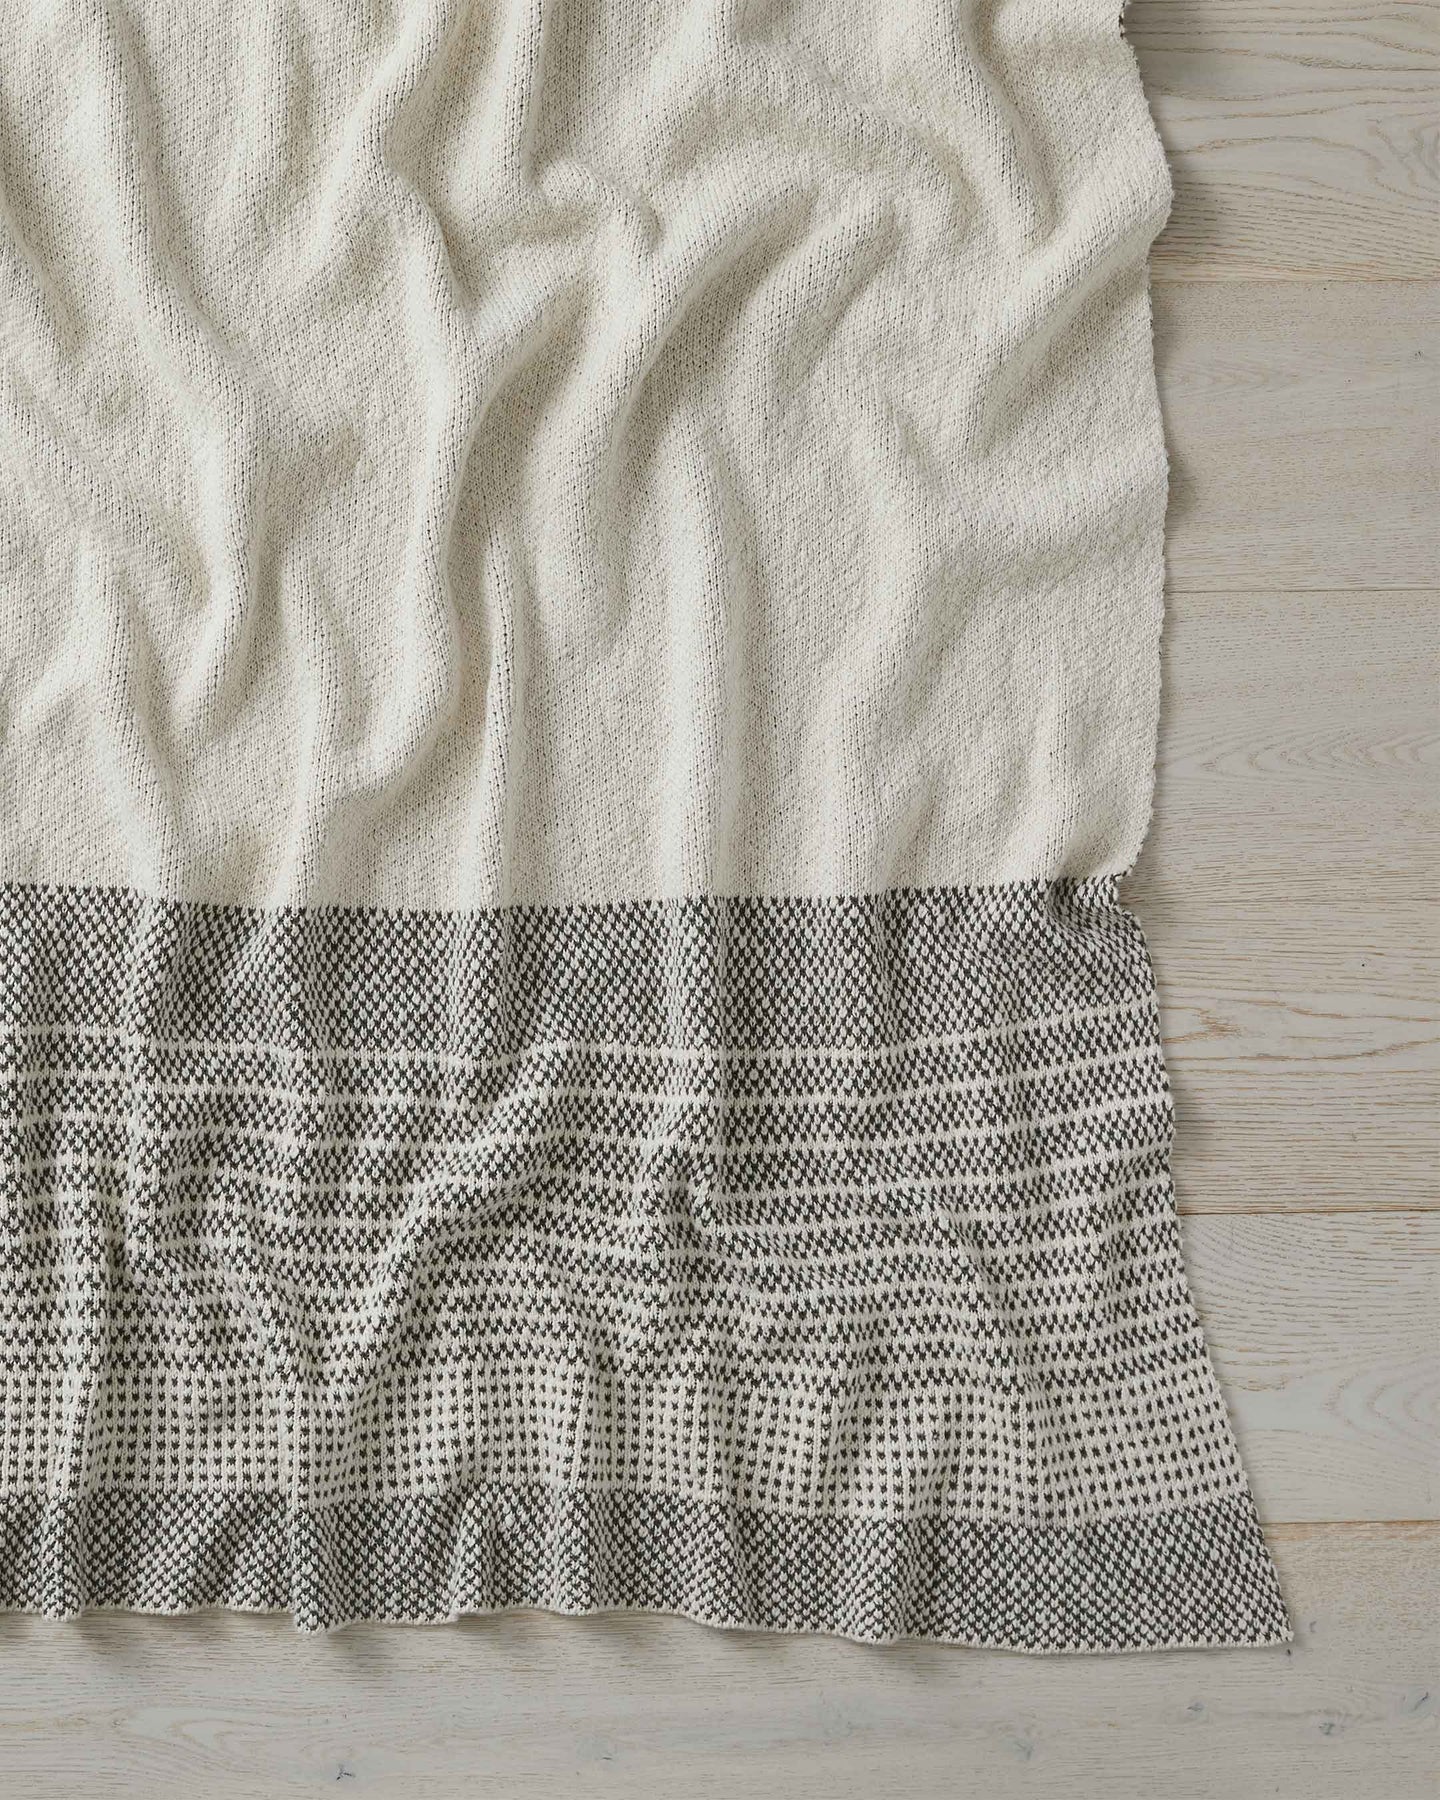 Made from 100% cotton, they offer intricate design details making them perfect for almost every room in the house.